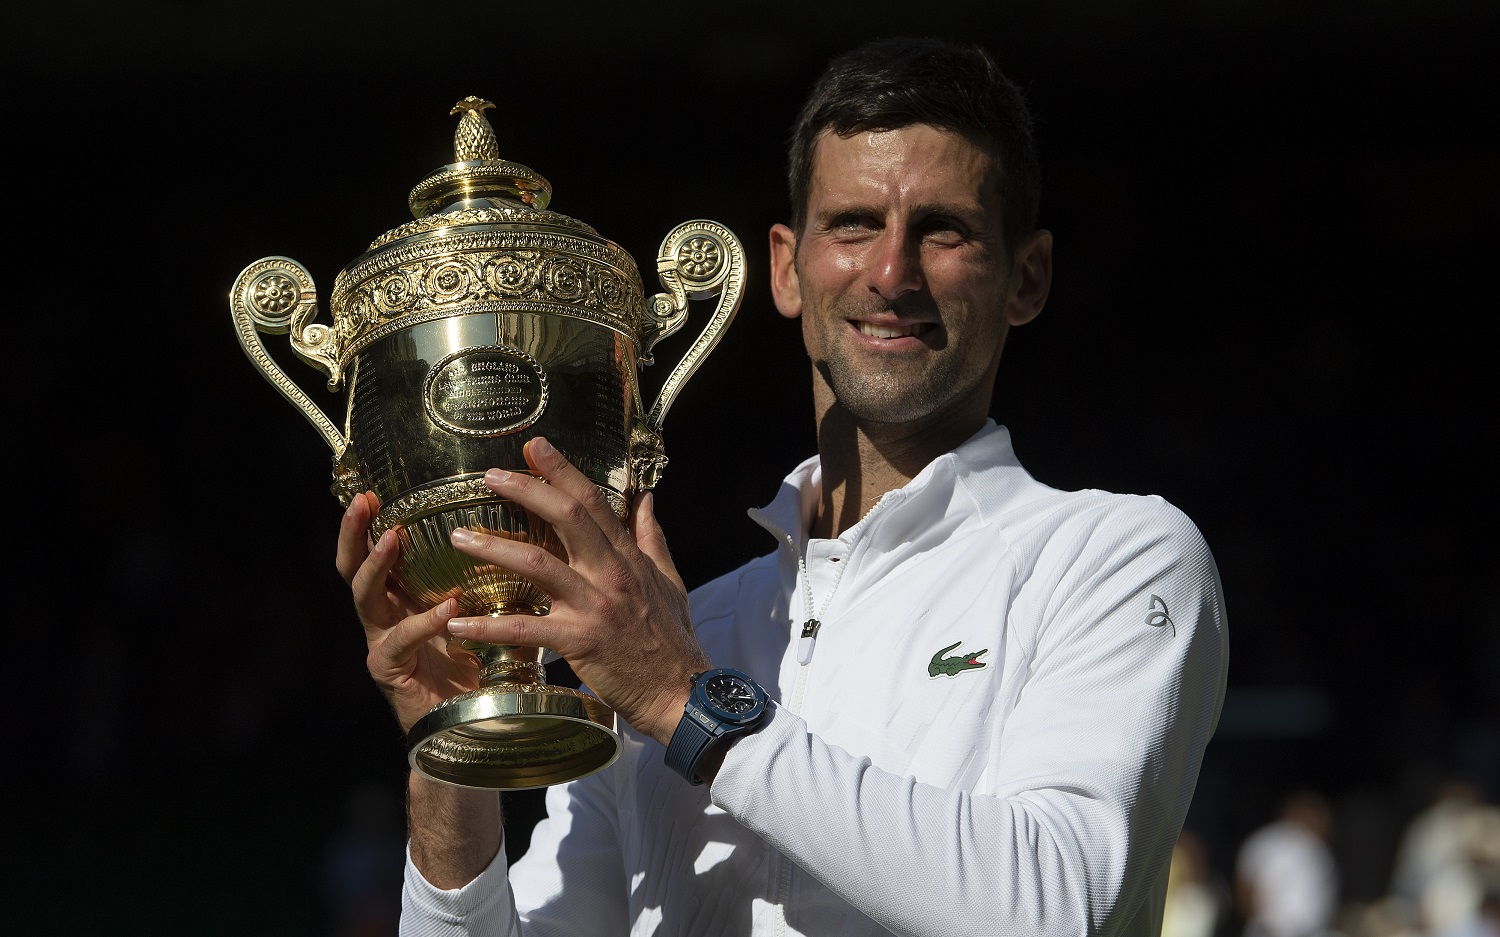 Novak Djokovic poses for photographs after his victory over Nick Kyrgios at All England Lawn Tennis and Croquet Club on July 10, 2022, in London.